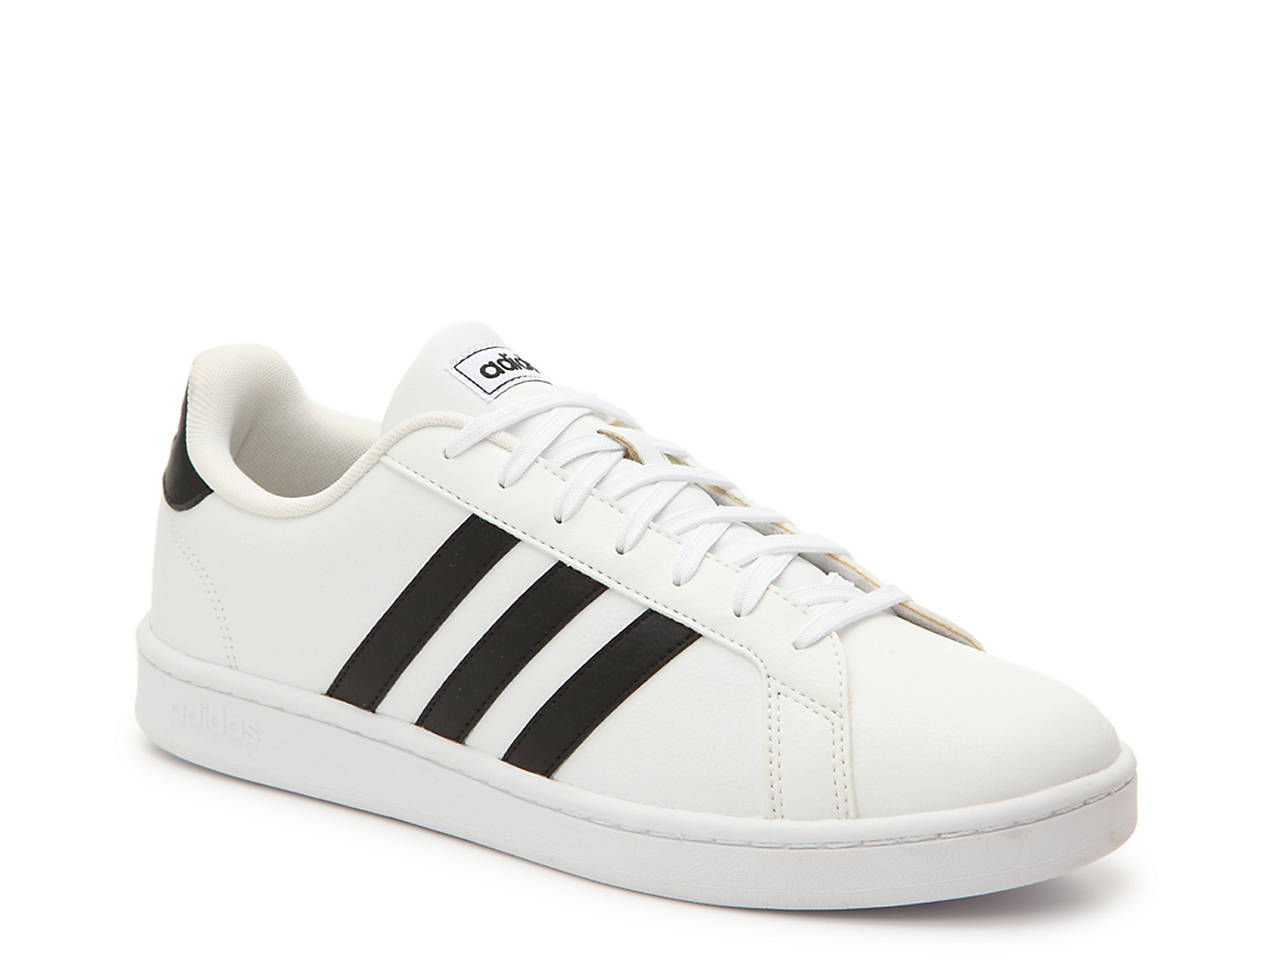 Adidas Men's Grand Court Shoes F36393 Black / White Leather 100%